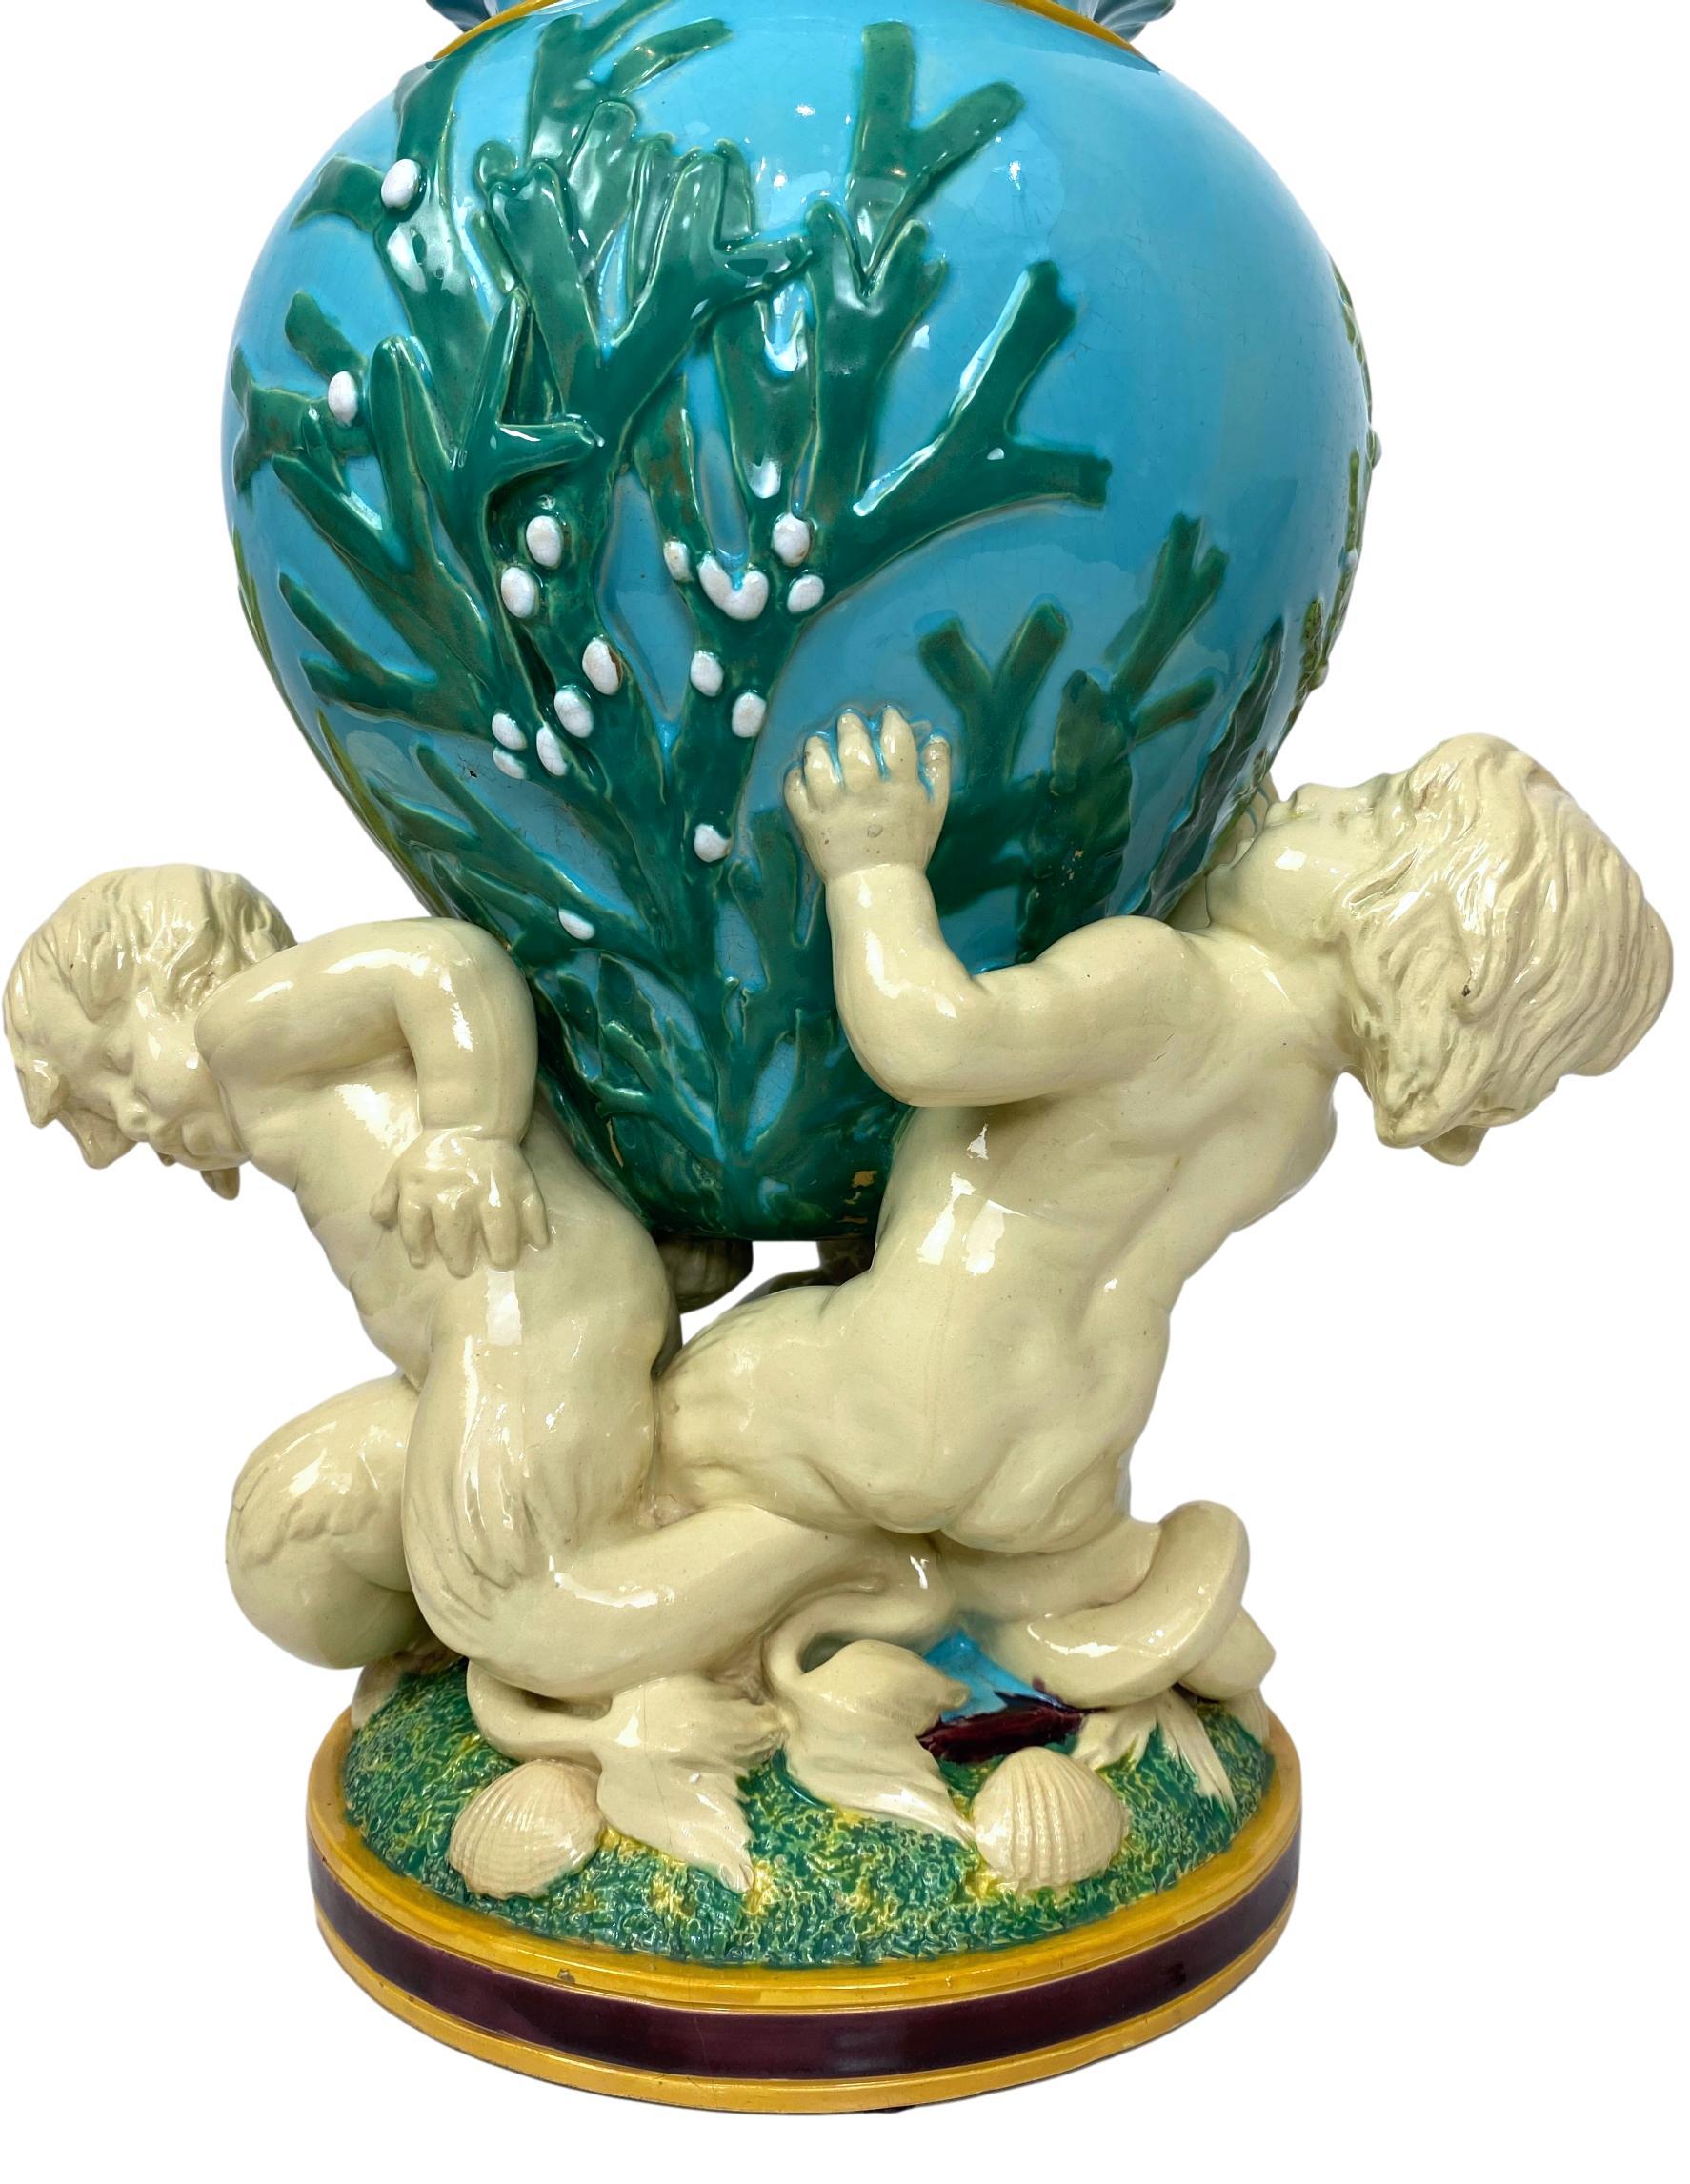 19th Century Minton Majolica Triton Marine Vase in Green, Turquoise, and Pink, ca. 1855